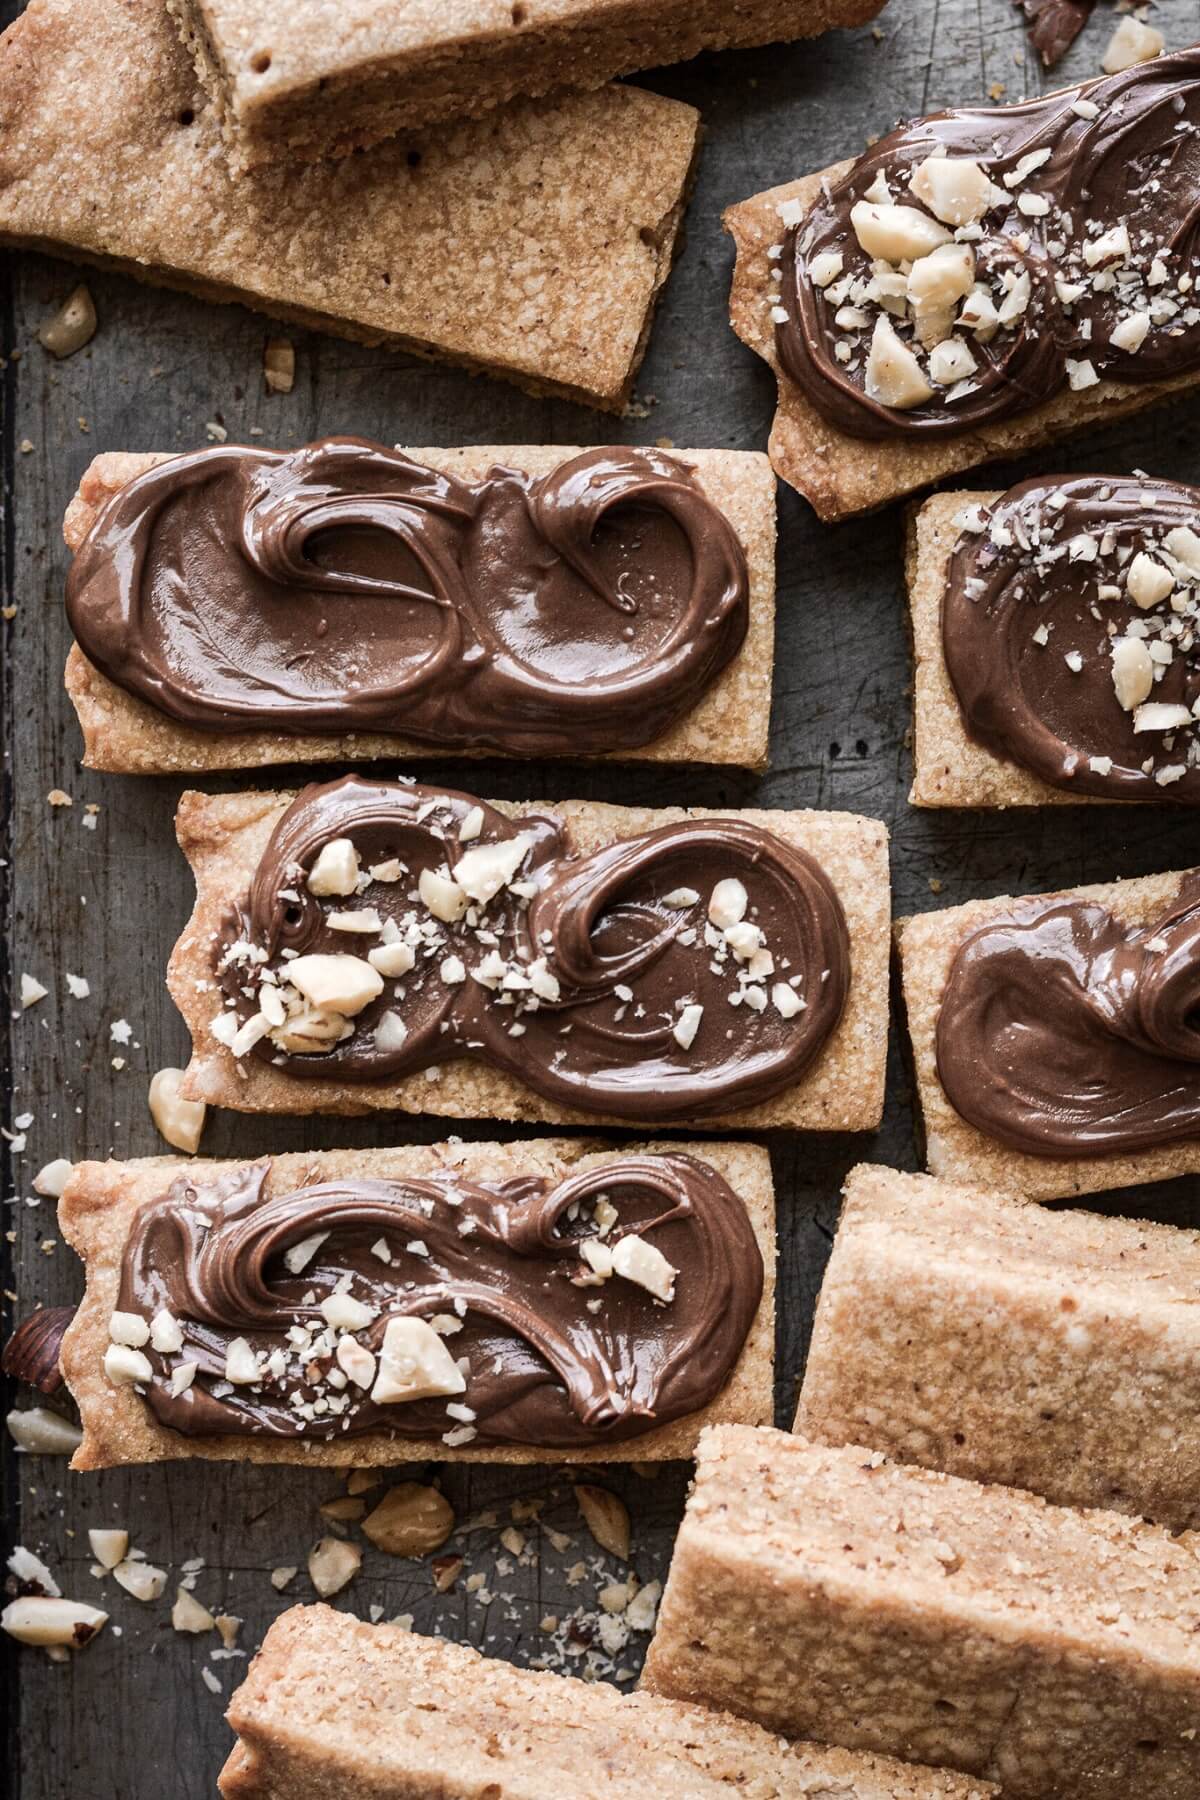 Hazelnut shortbread cut into bars and spread with Nutella.